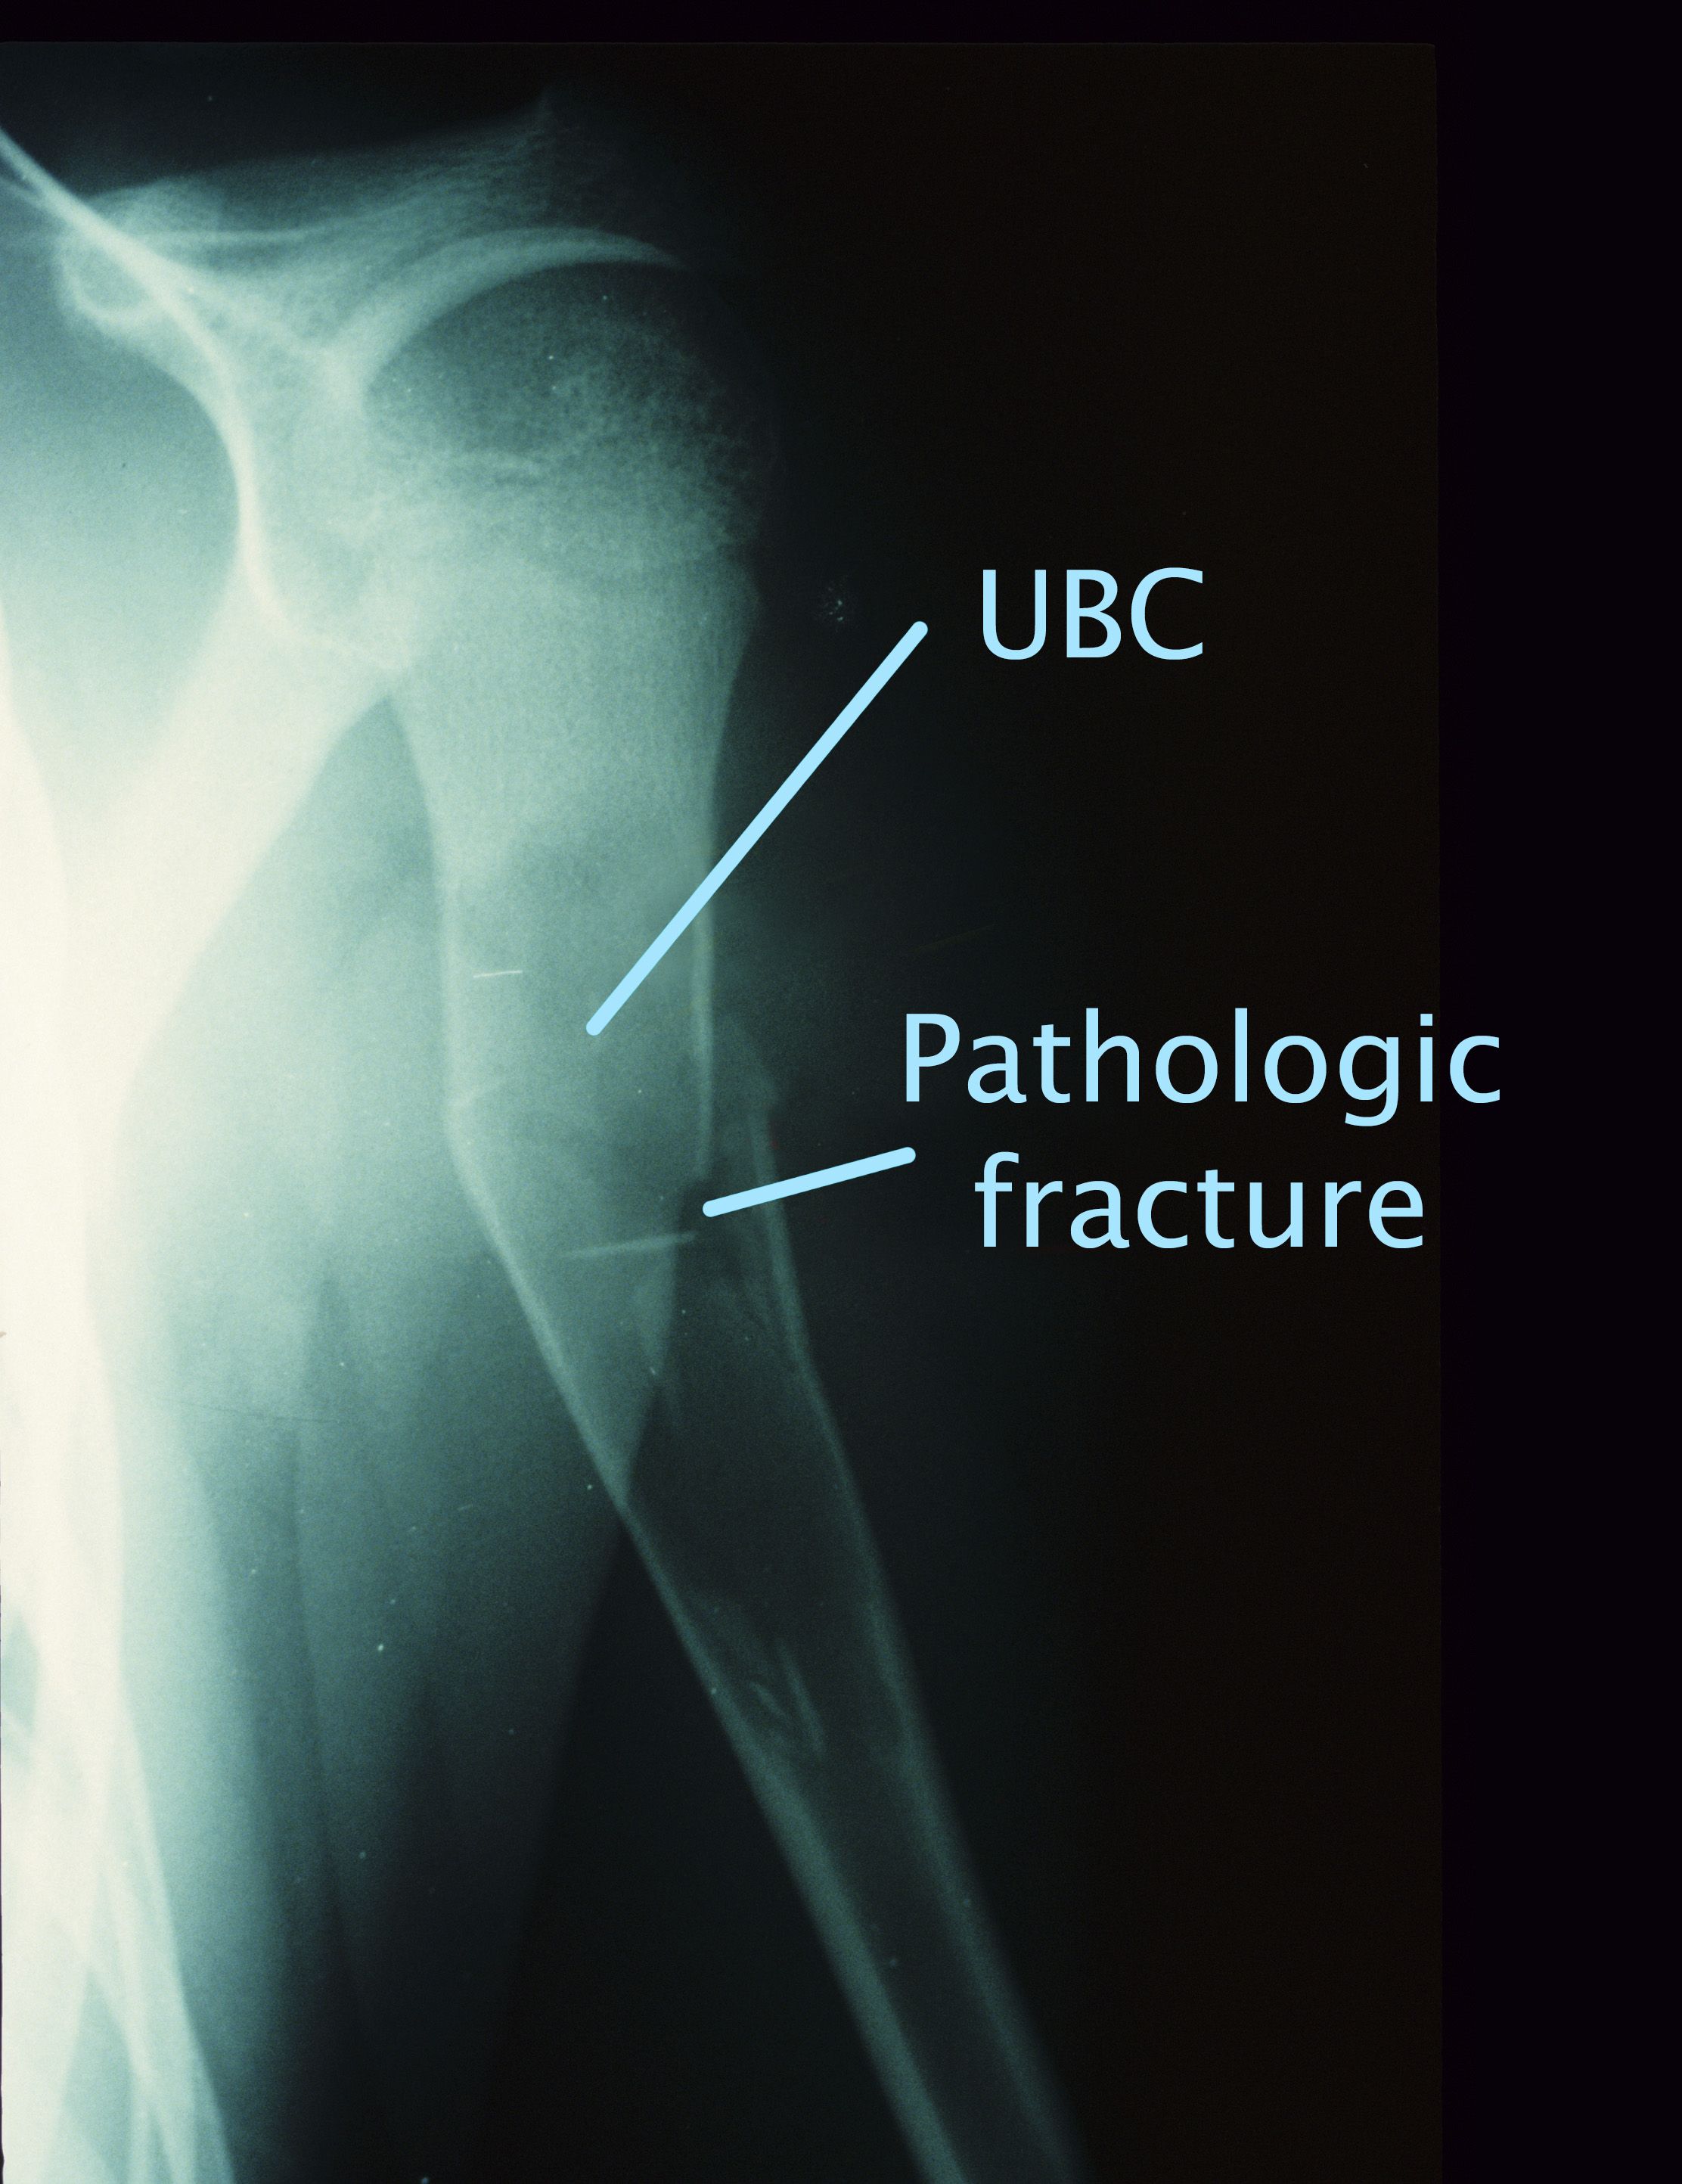 Unicameral bone cyst and pathologic fracture